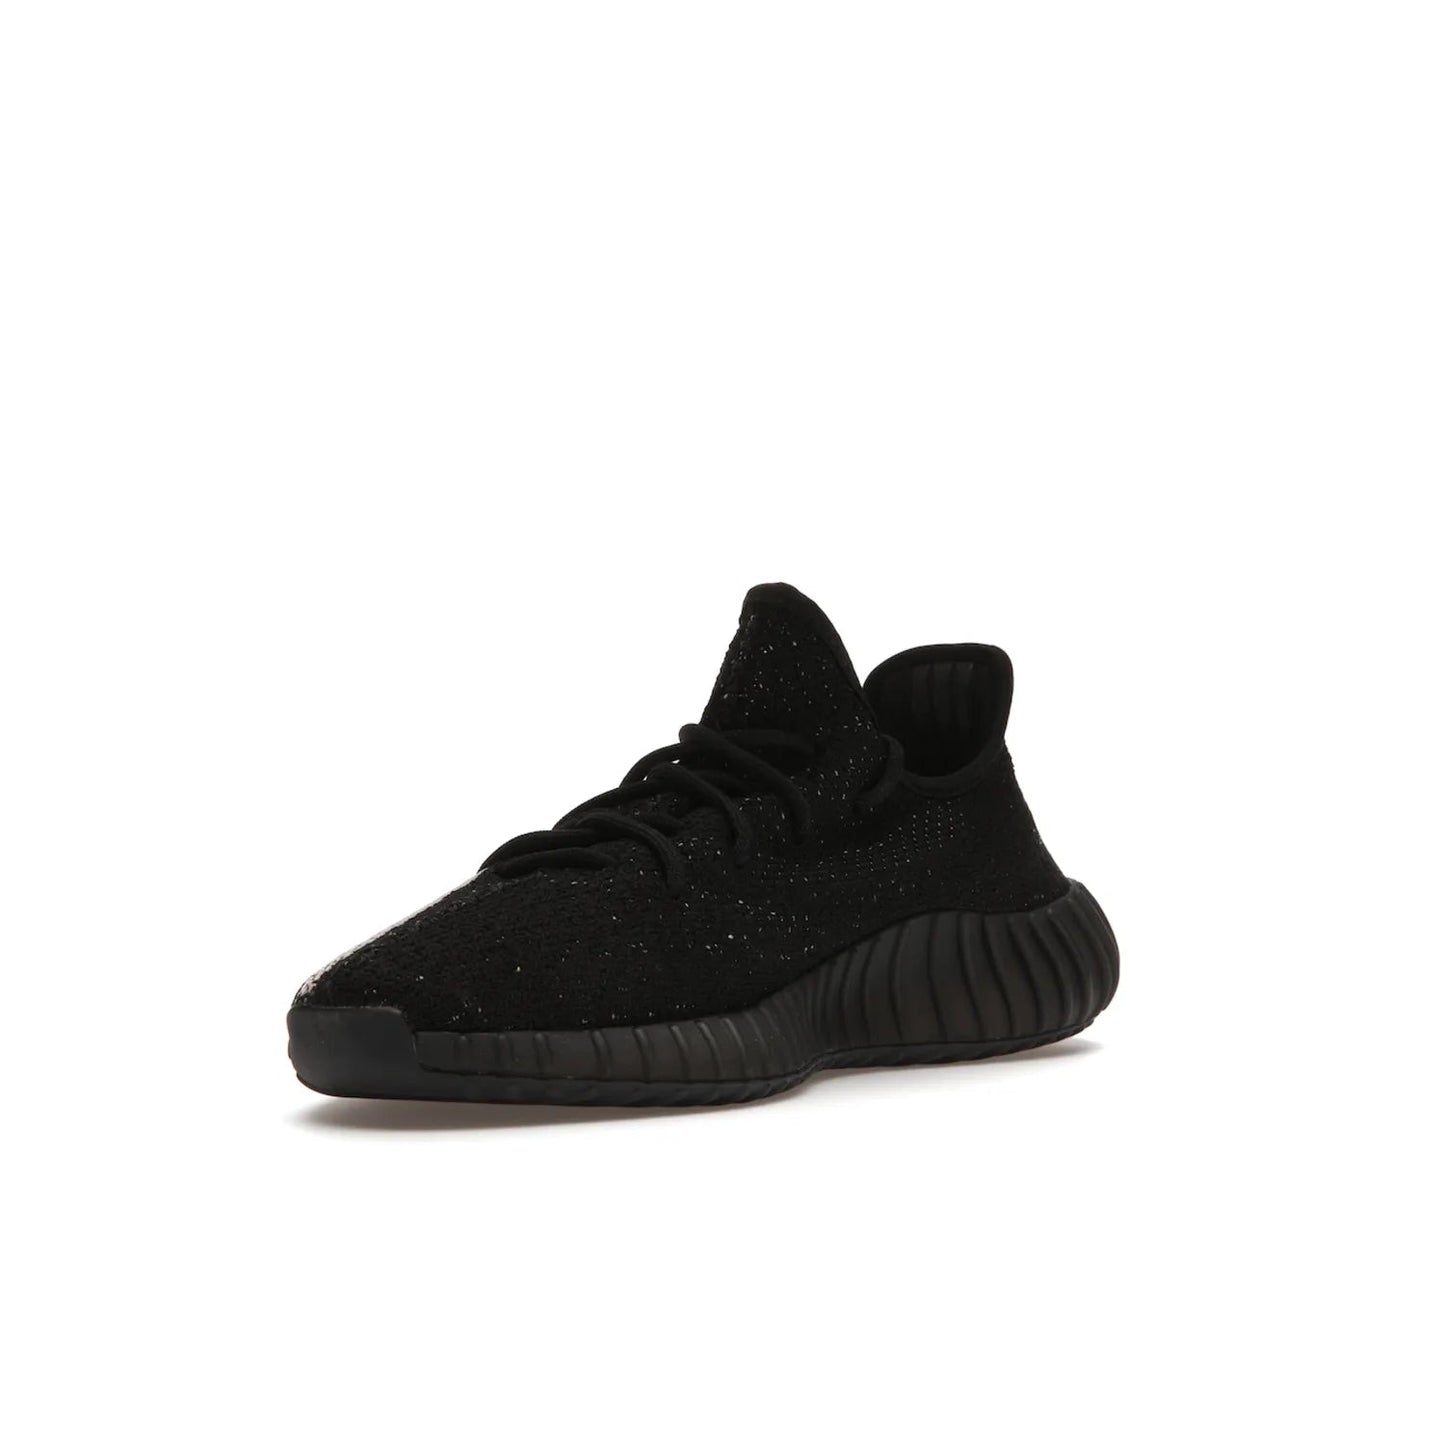 adidas Yeezy Boost 350 V2 Core Black White (2016/2022) - Image 14 - Only at www.BallersClubKickz.com - Stylish adidas Yeezy Boost 350 V2 in classic black with white "SPLY-350" stitched to the side stripe. Features Primeknit upper & Boost sole for comfort. Restock in March 2022.